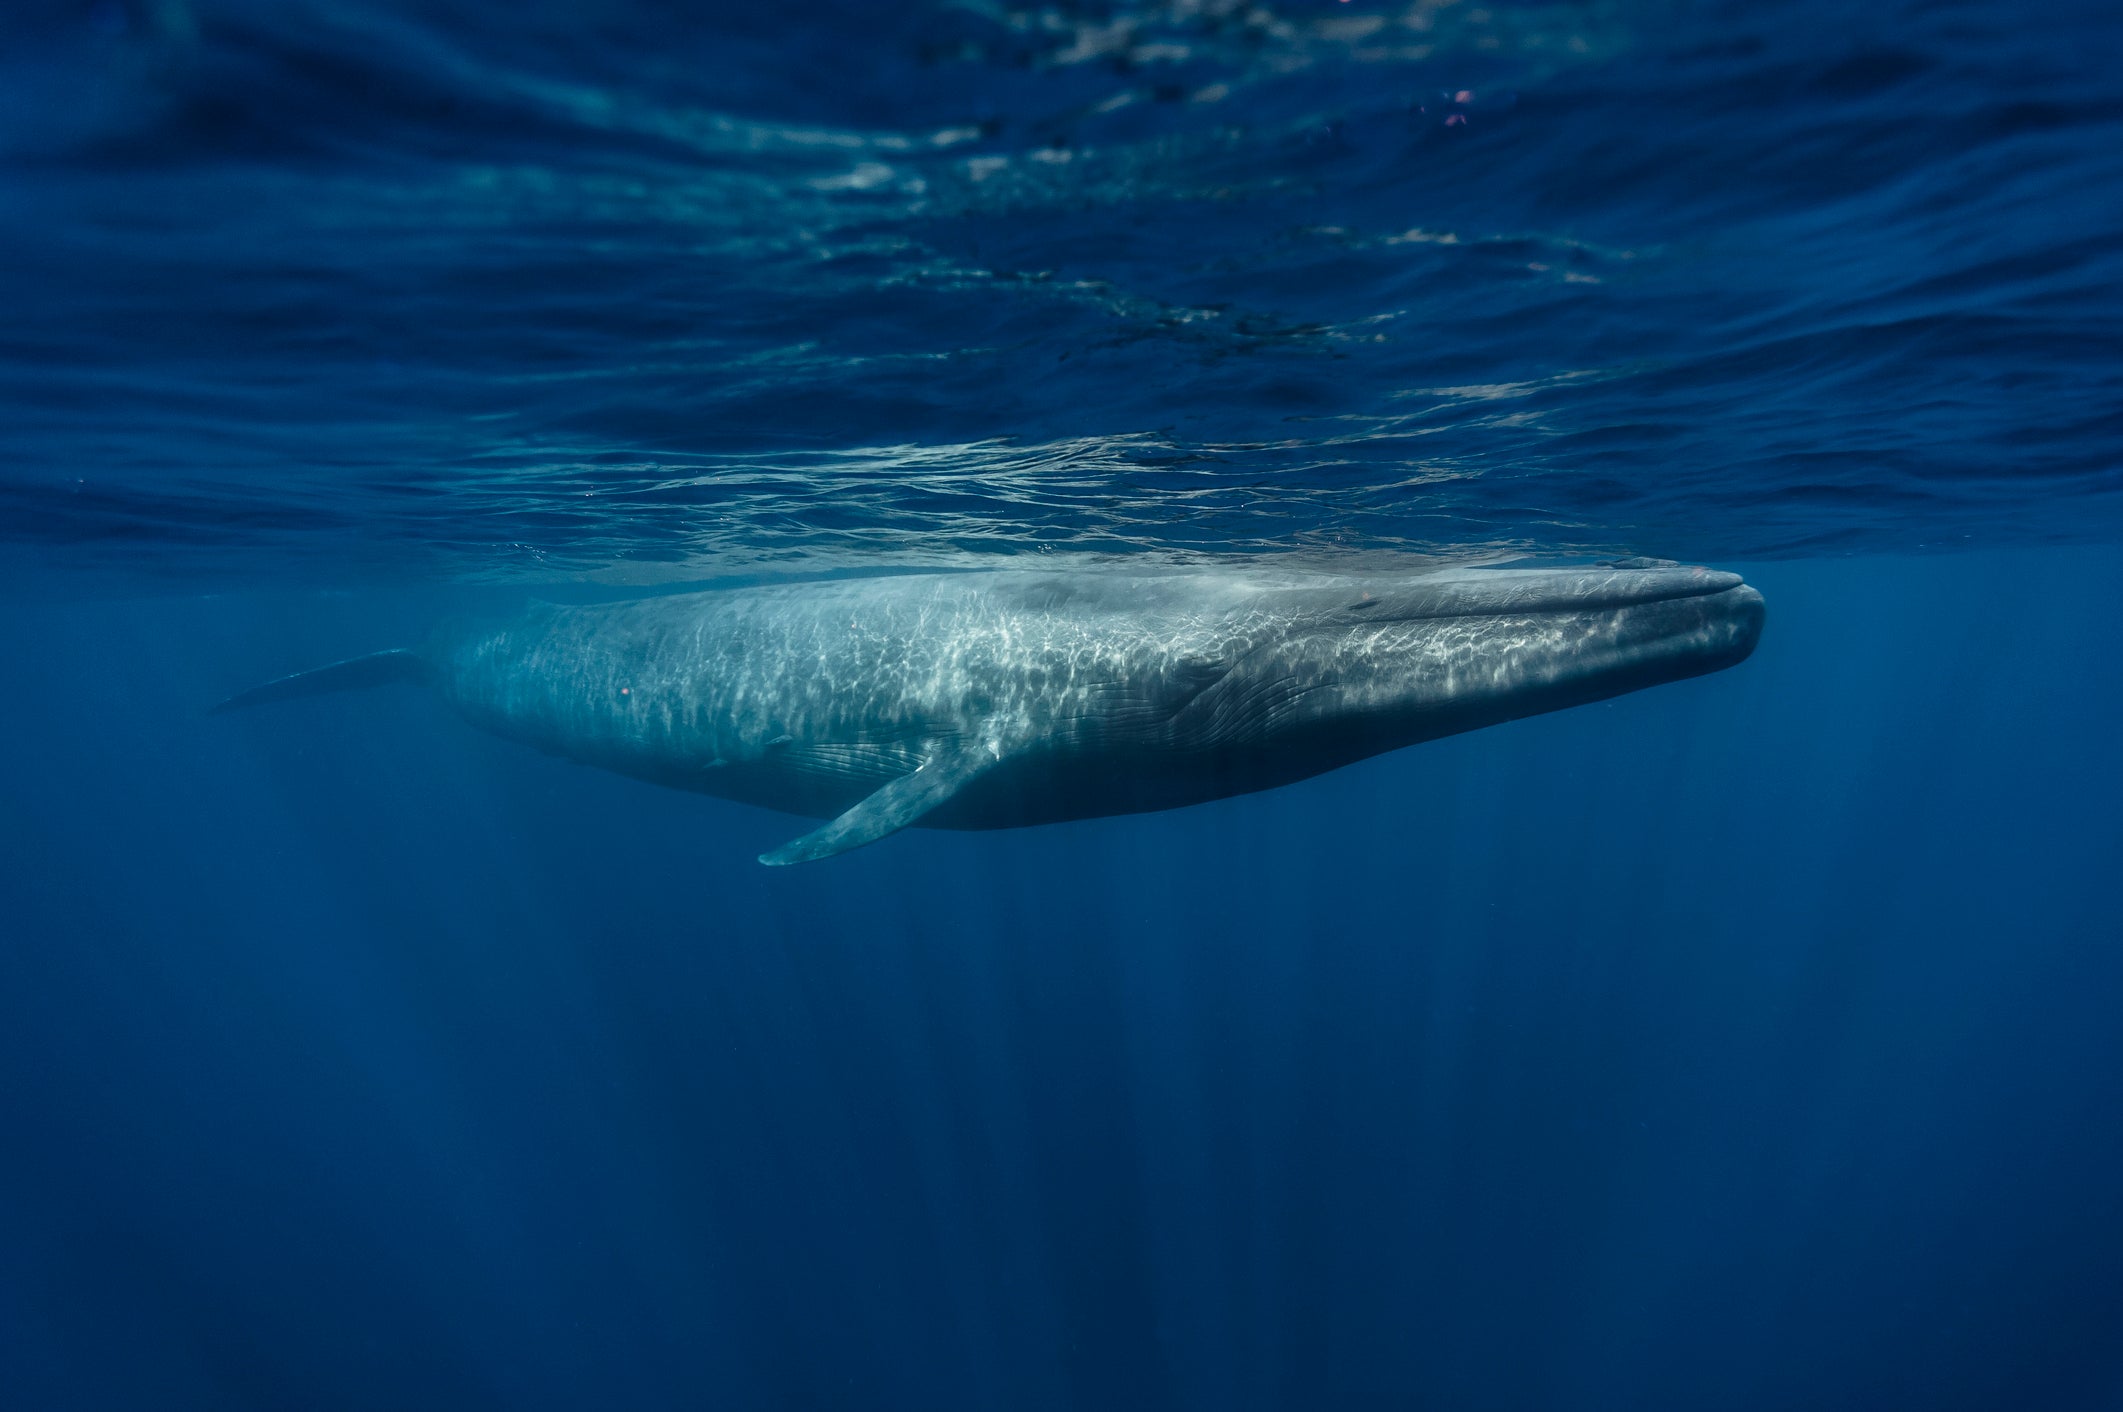 The blue whale is the largest animal to have ever lived and has one of the world's loudest calls